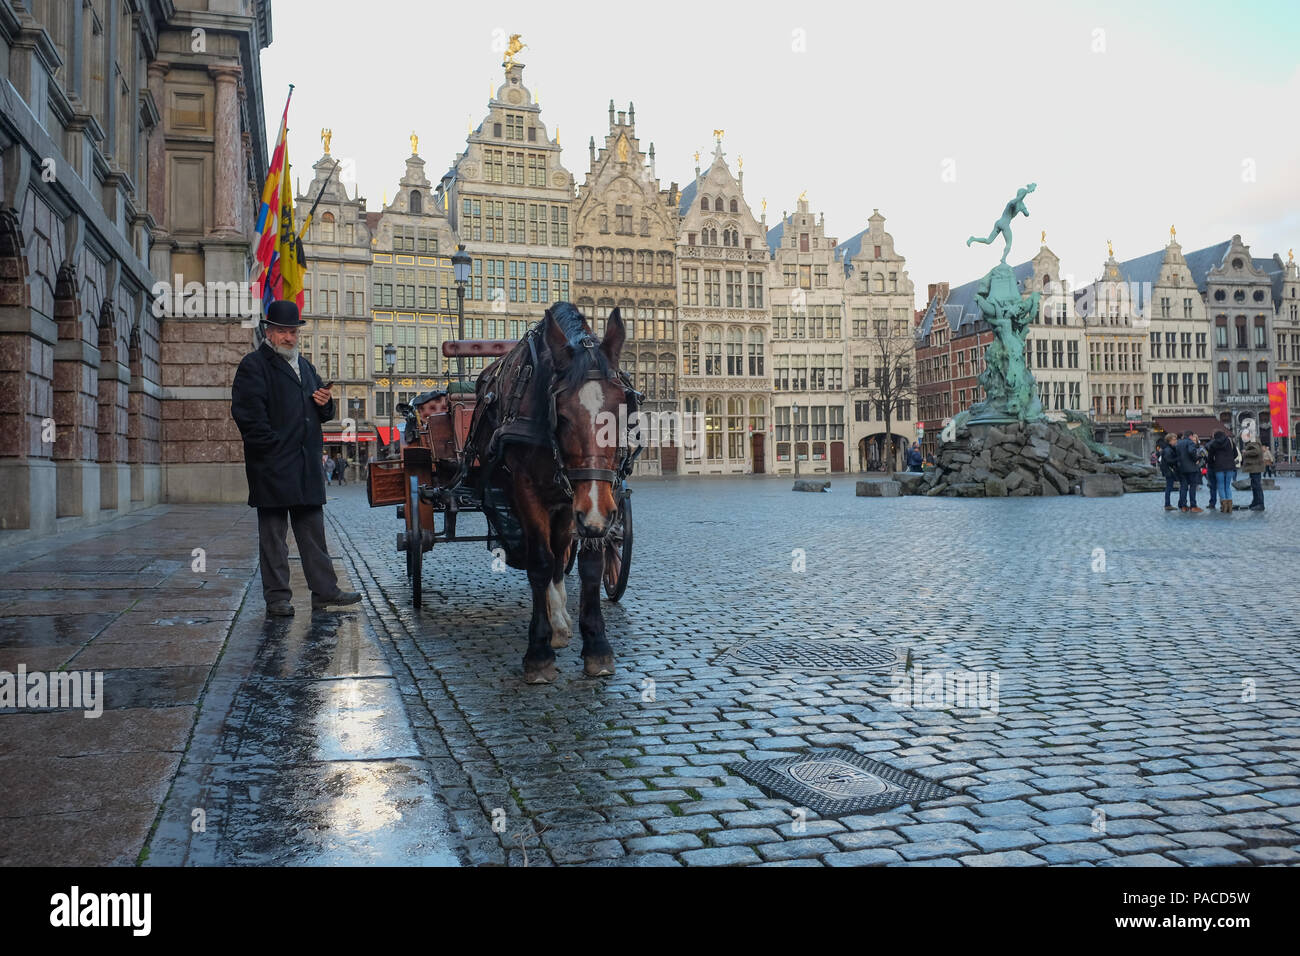 Man with cart and horse on historic 'Grote Markt' square in Antwerp, Belgium. Stock Photo